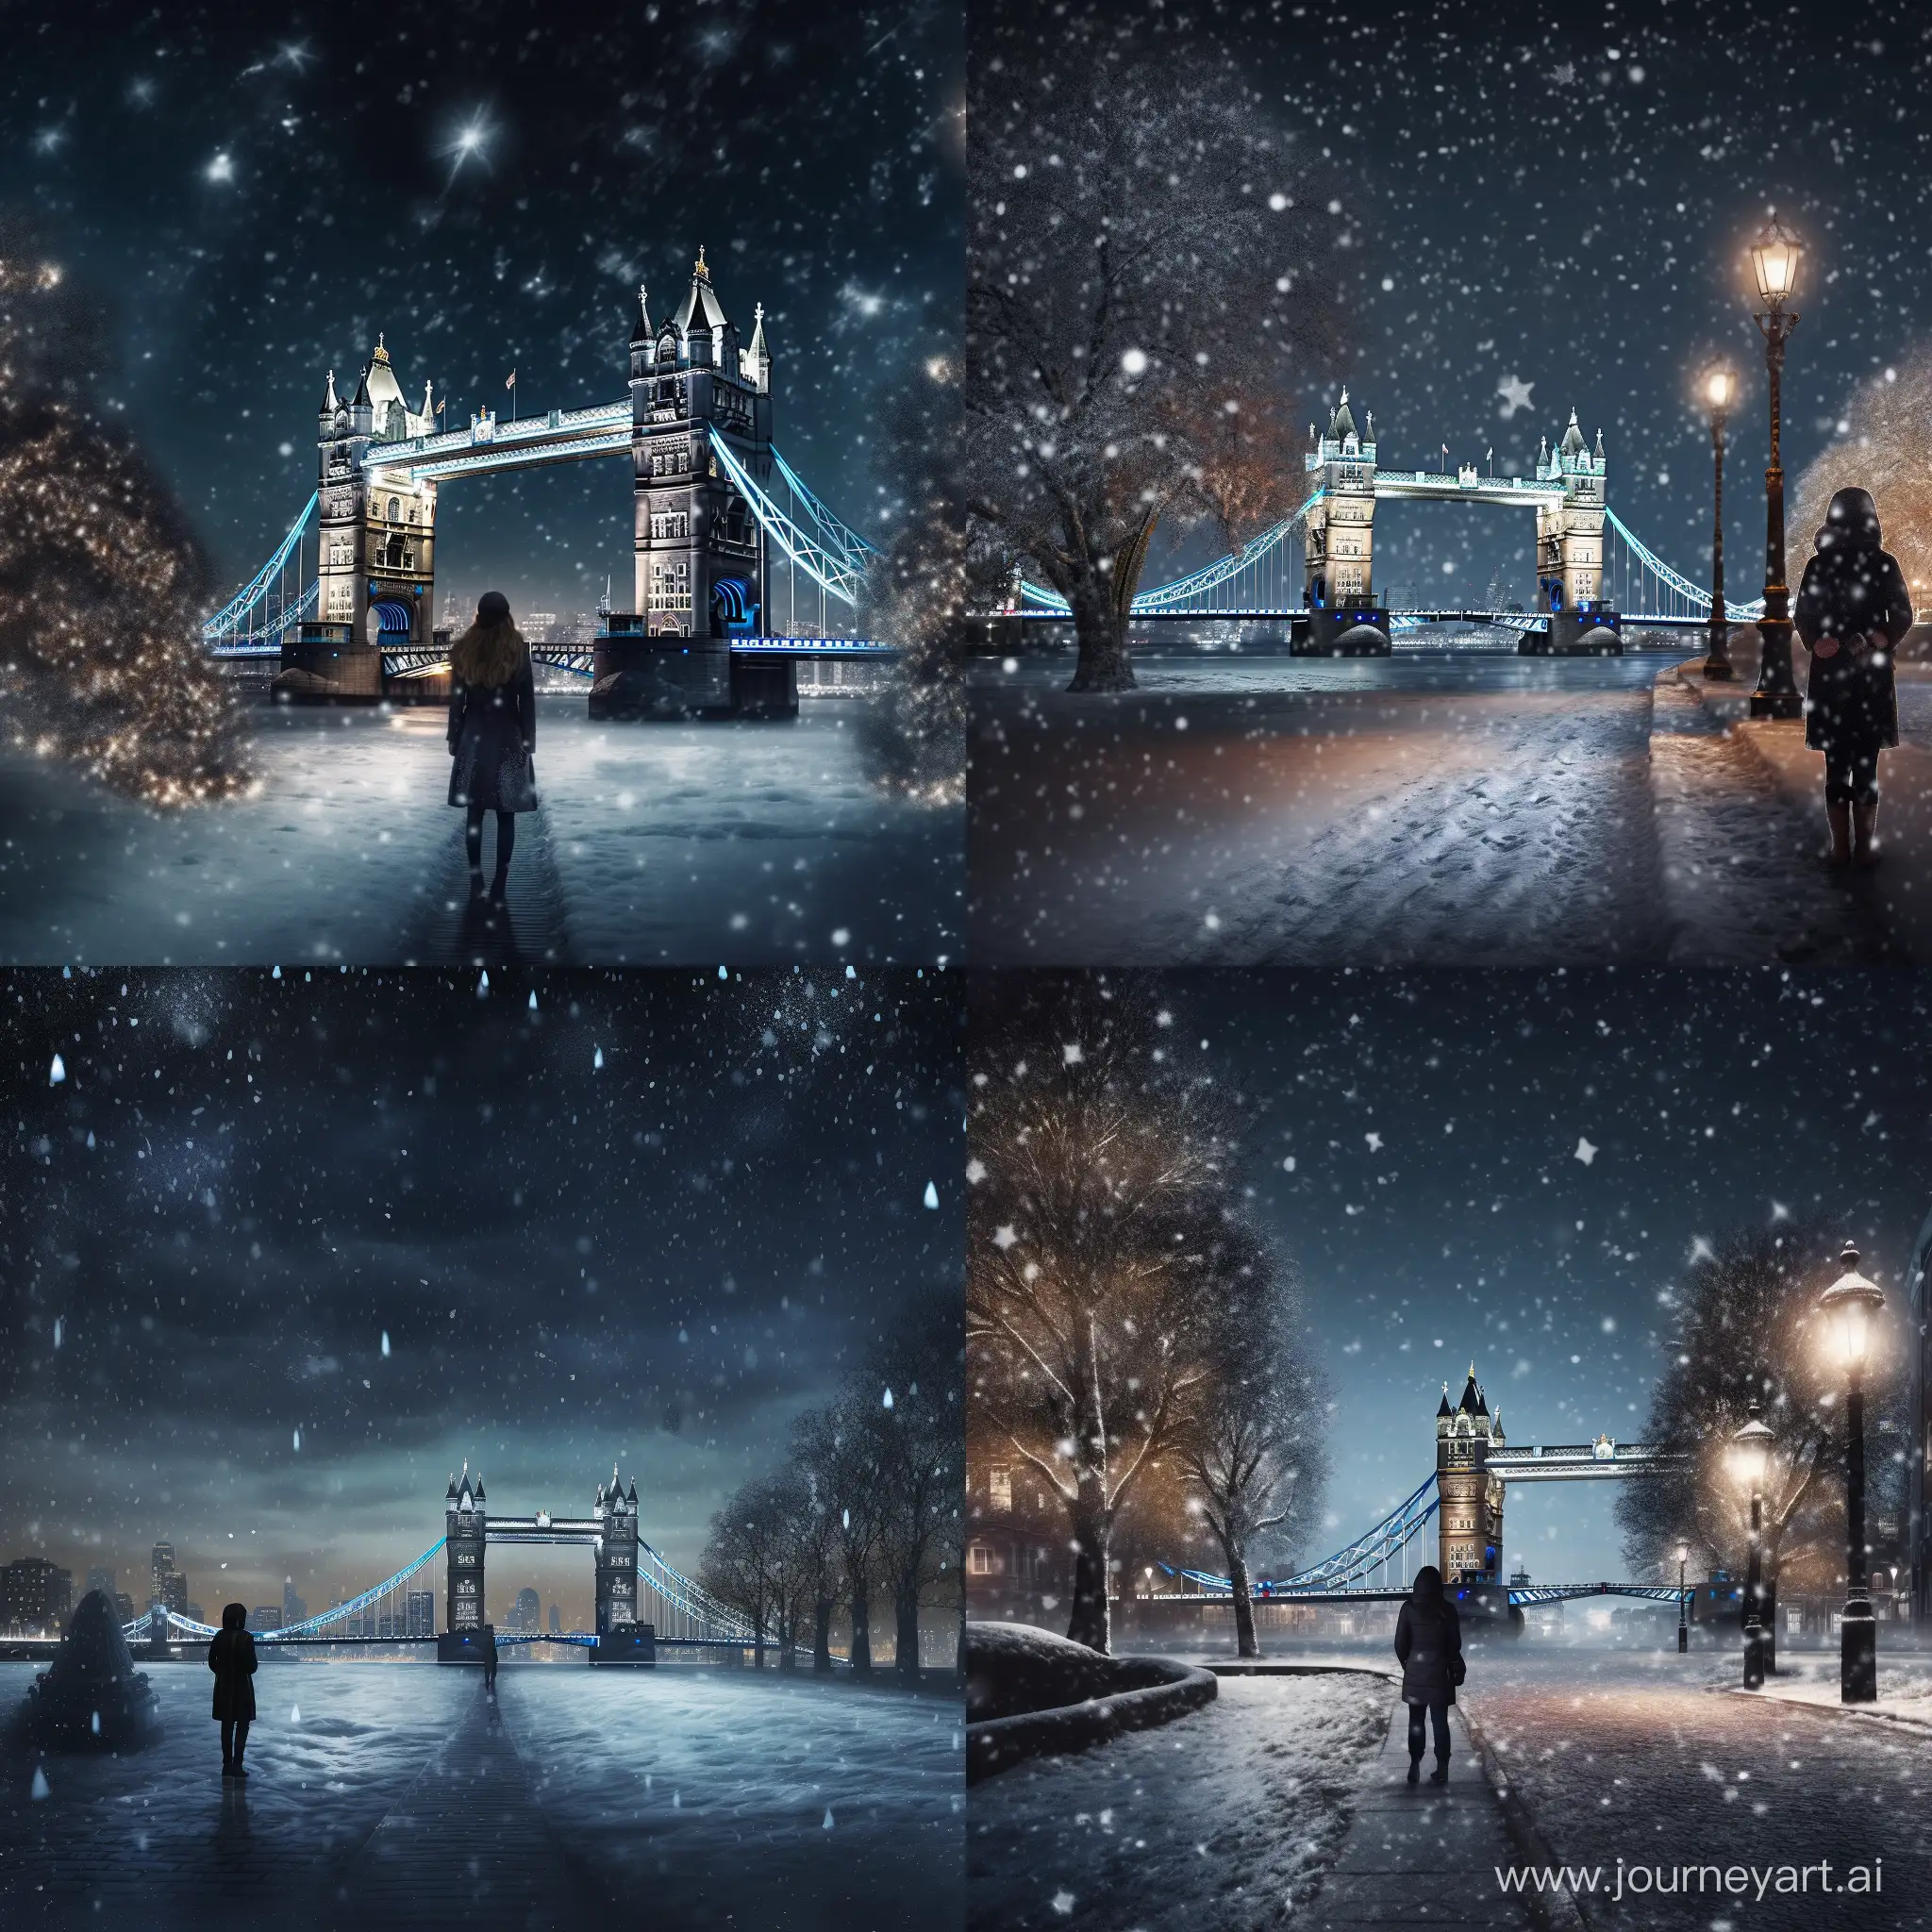 Lonely-Night-in-London-Solitude-by-Tower-Bridge-in-Snowy-Serenity